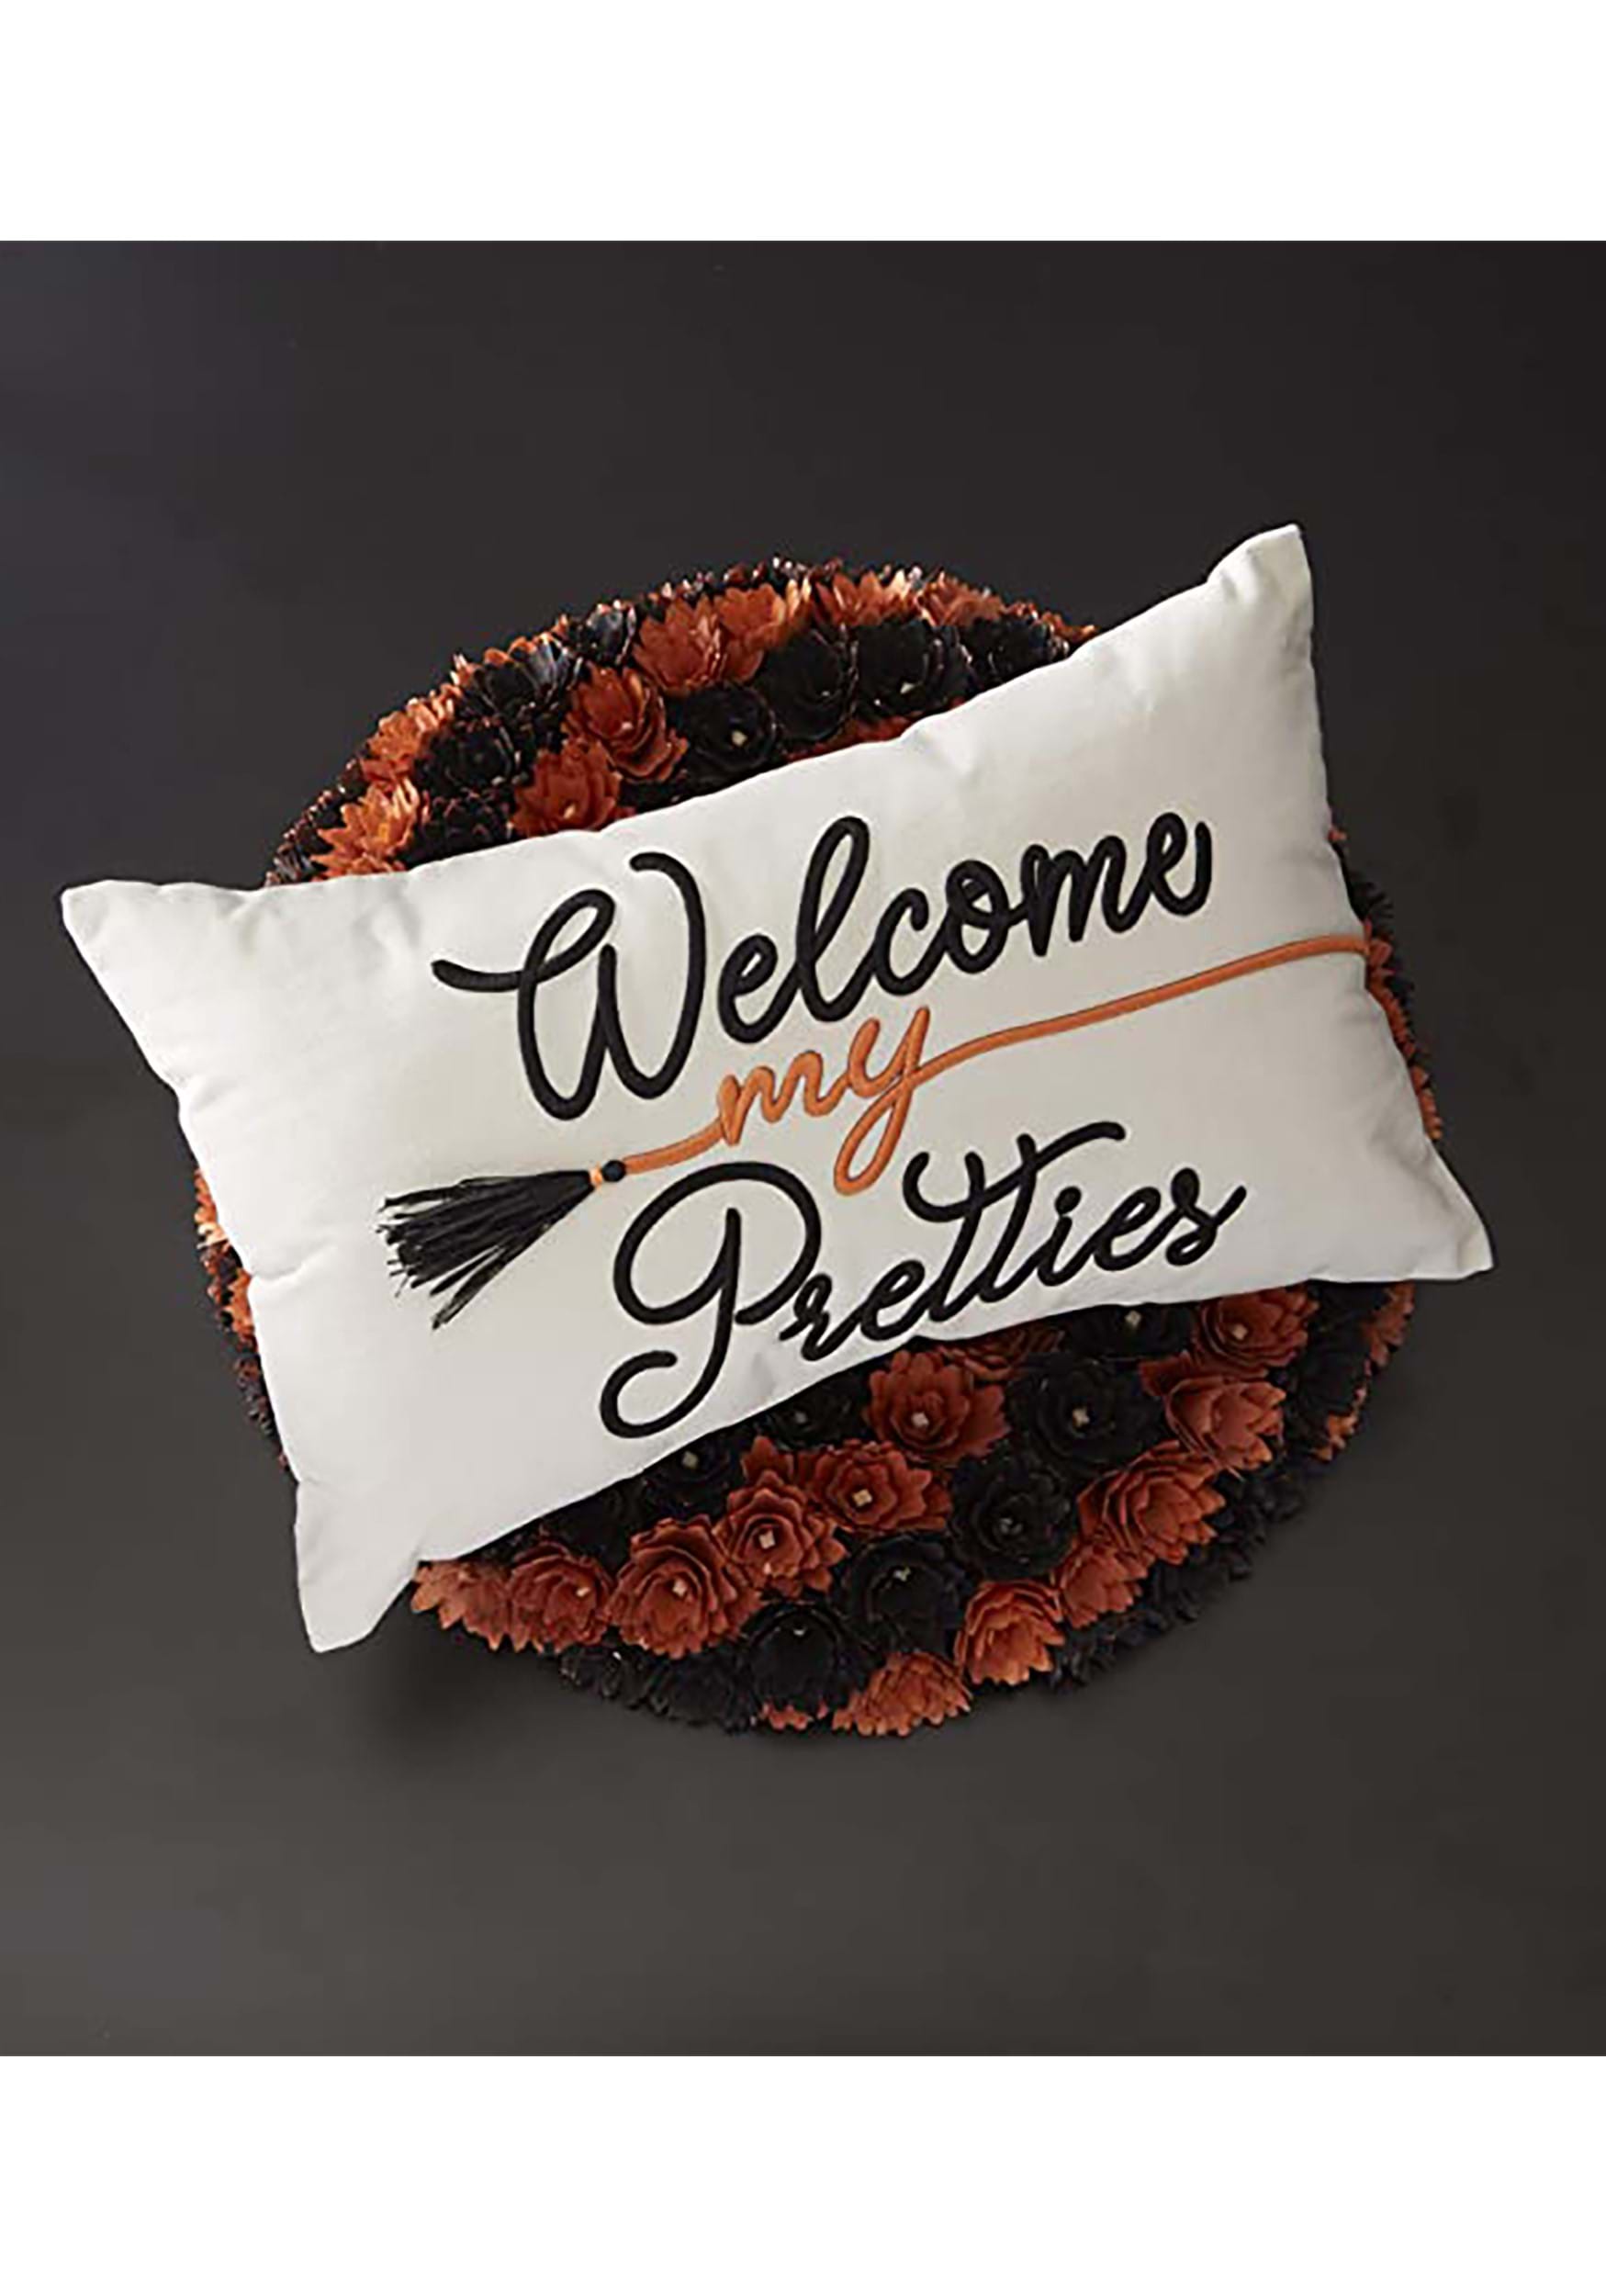 19 Inch Welcome My Pretties Embroidered Pillow , Halloween Bedding And Living